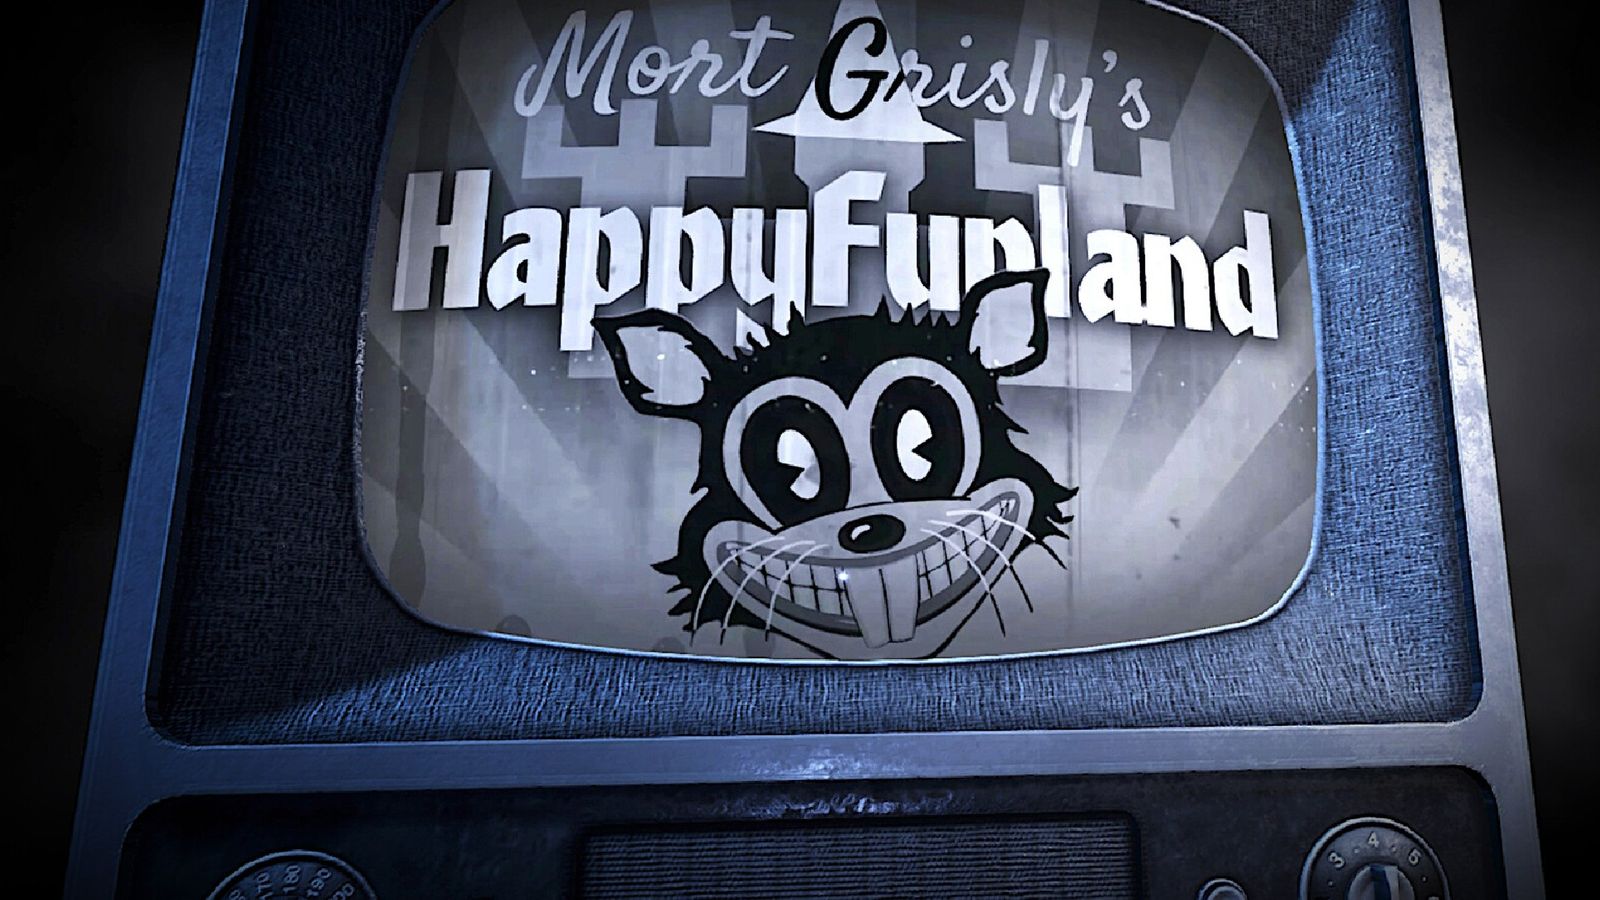 HappyFunland advert on a TV in the VR horror game